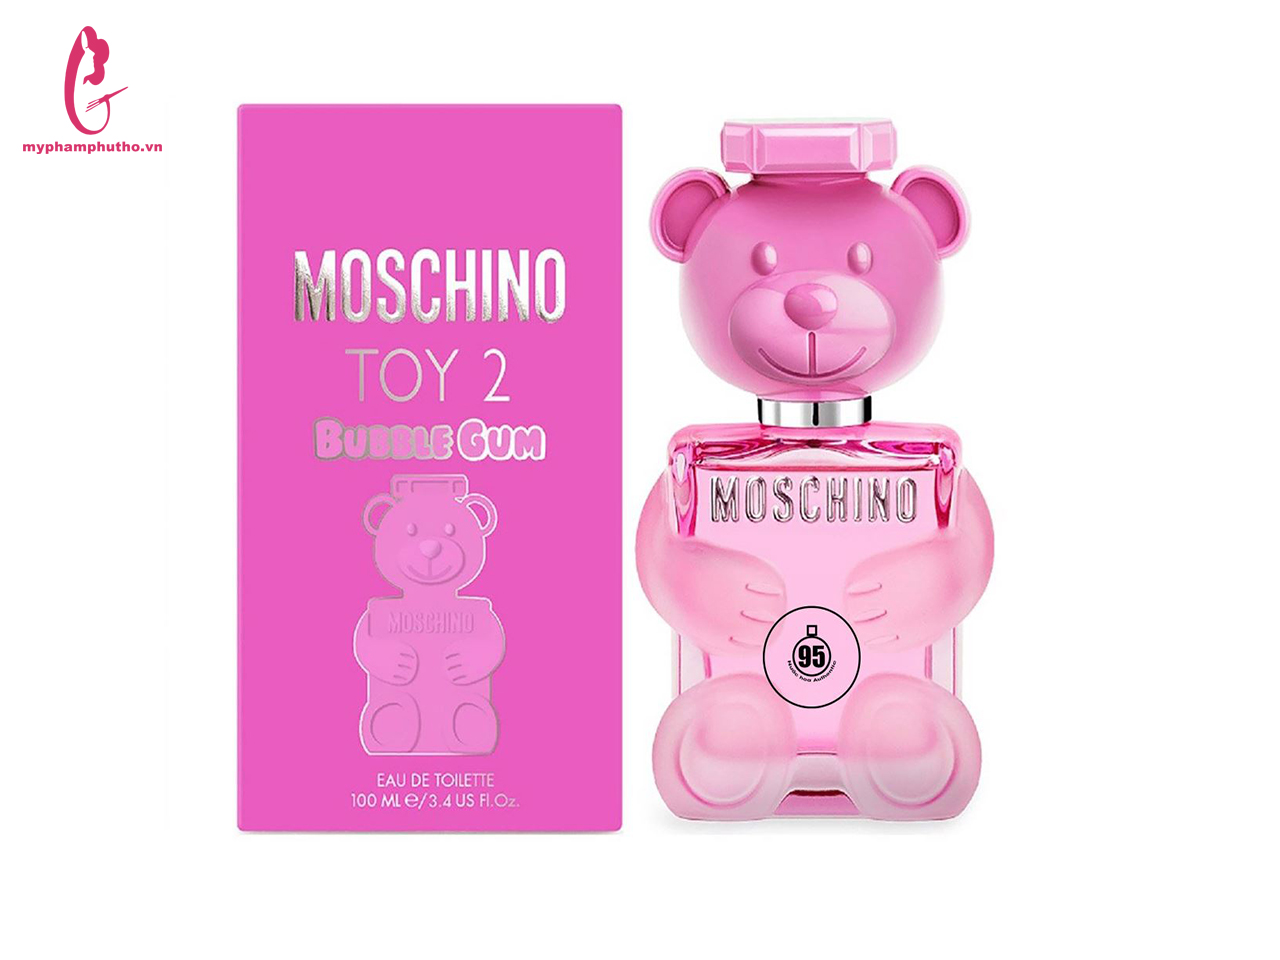 Moschino  This is not a Moschino toy This is Moschino TOY Discover the  new Moschino fragrance httpbitlymoschinotoy  Facebook